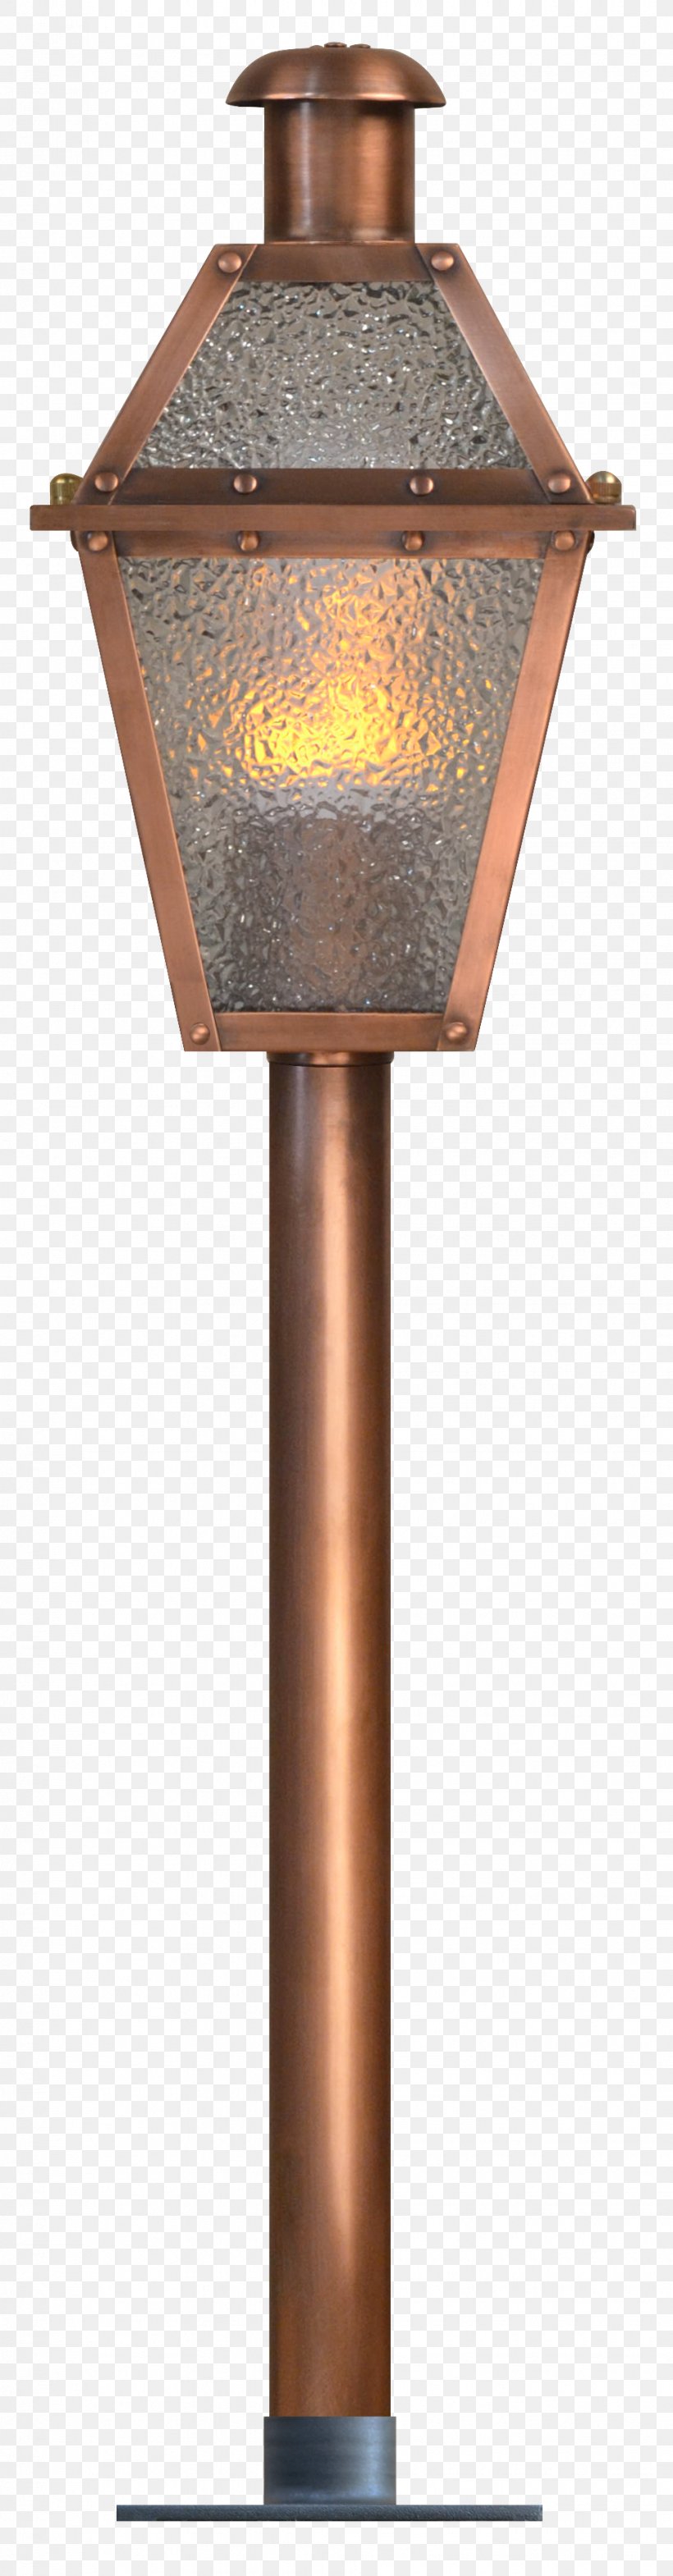 Landscape Lighting Lantern Coppersmith, PNG, 970x3714px, Light, Chandelier, Copper, Coppersmith, Electricity Download Free